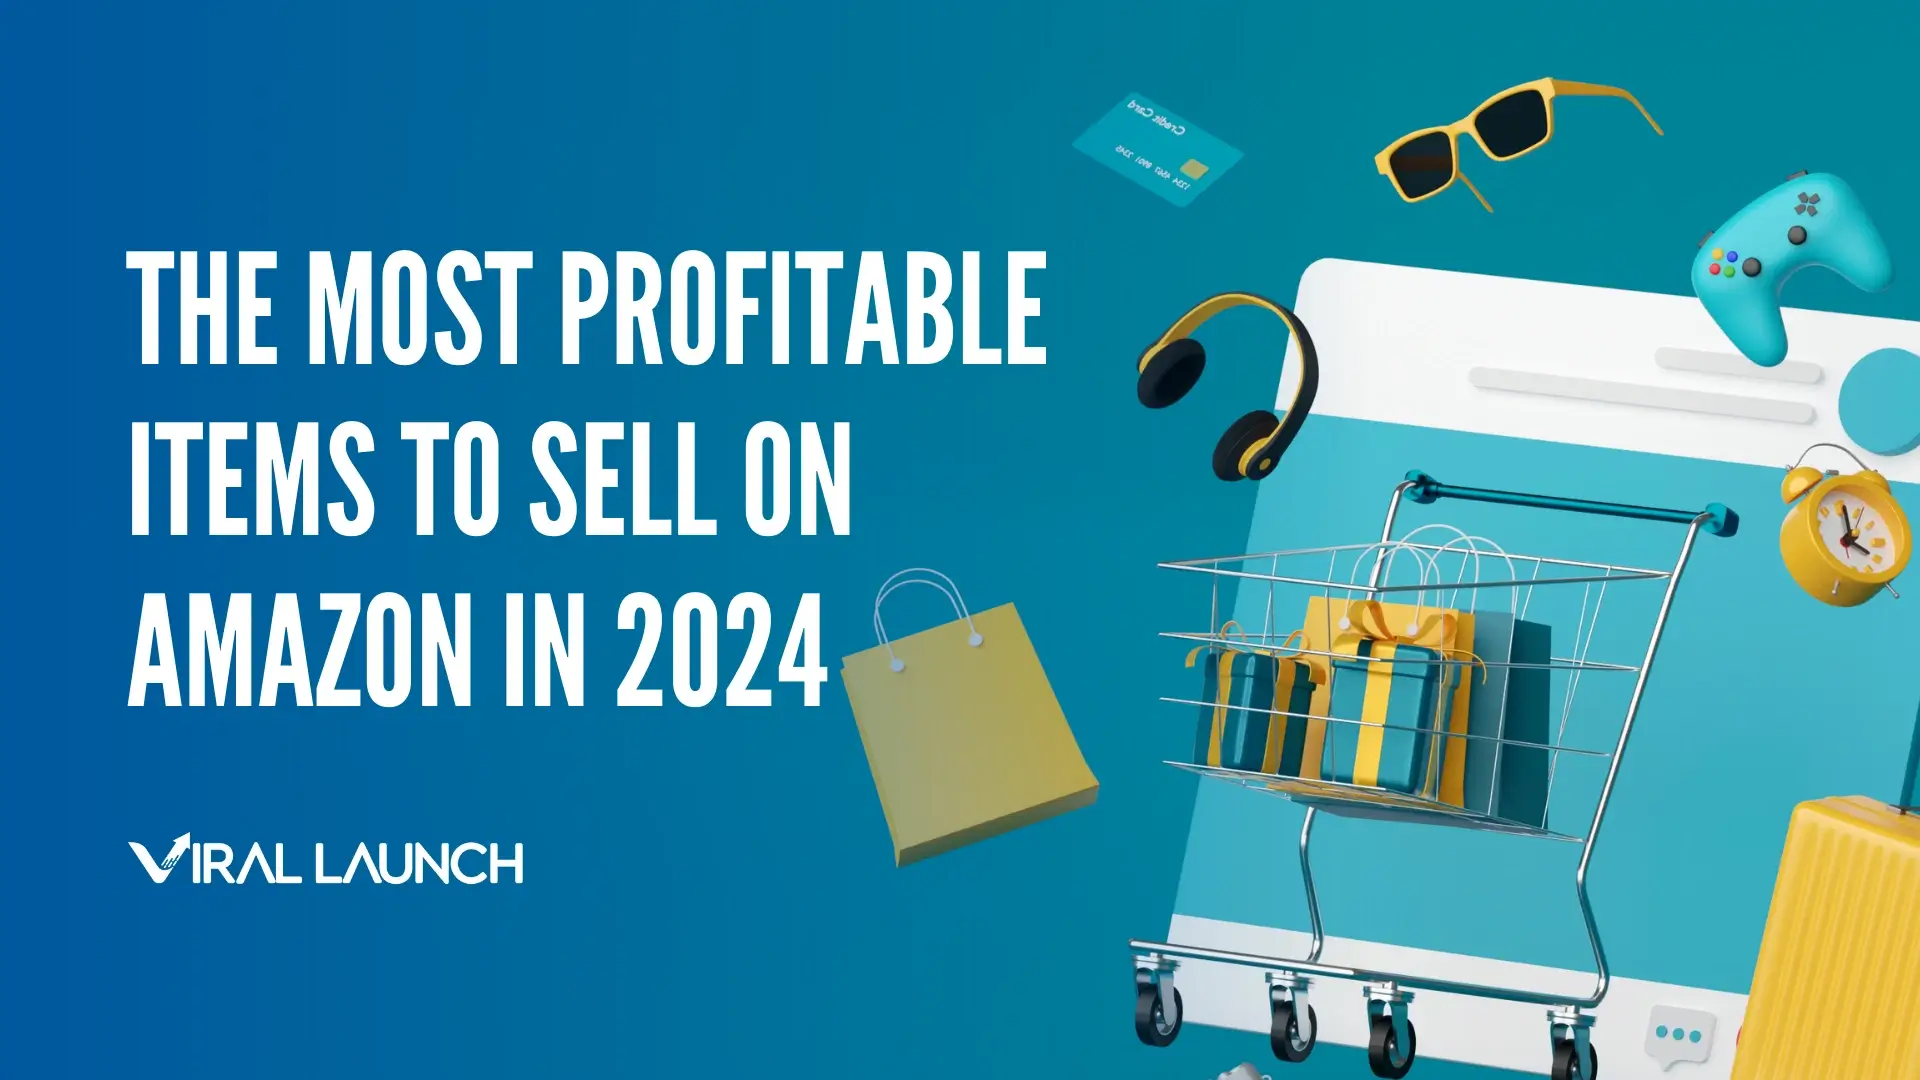 A graphic with the most profitable items to sell on amazon in 2024 and the Viral Launch logo.